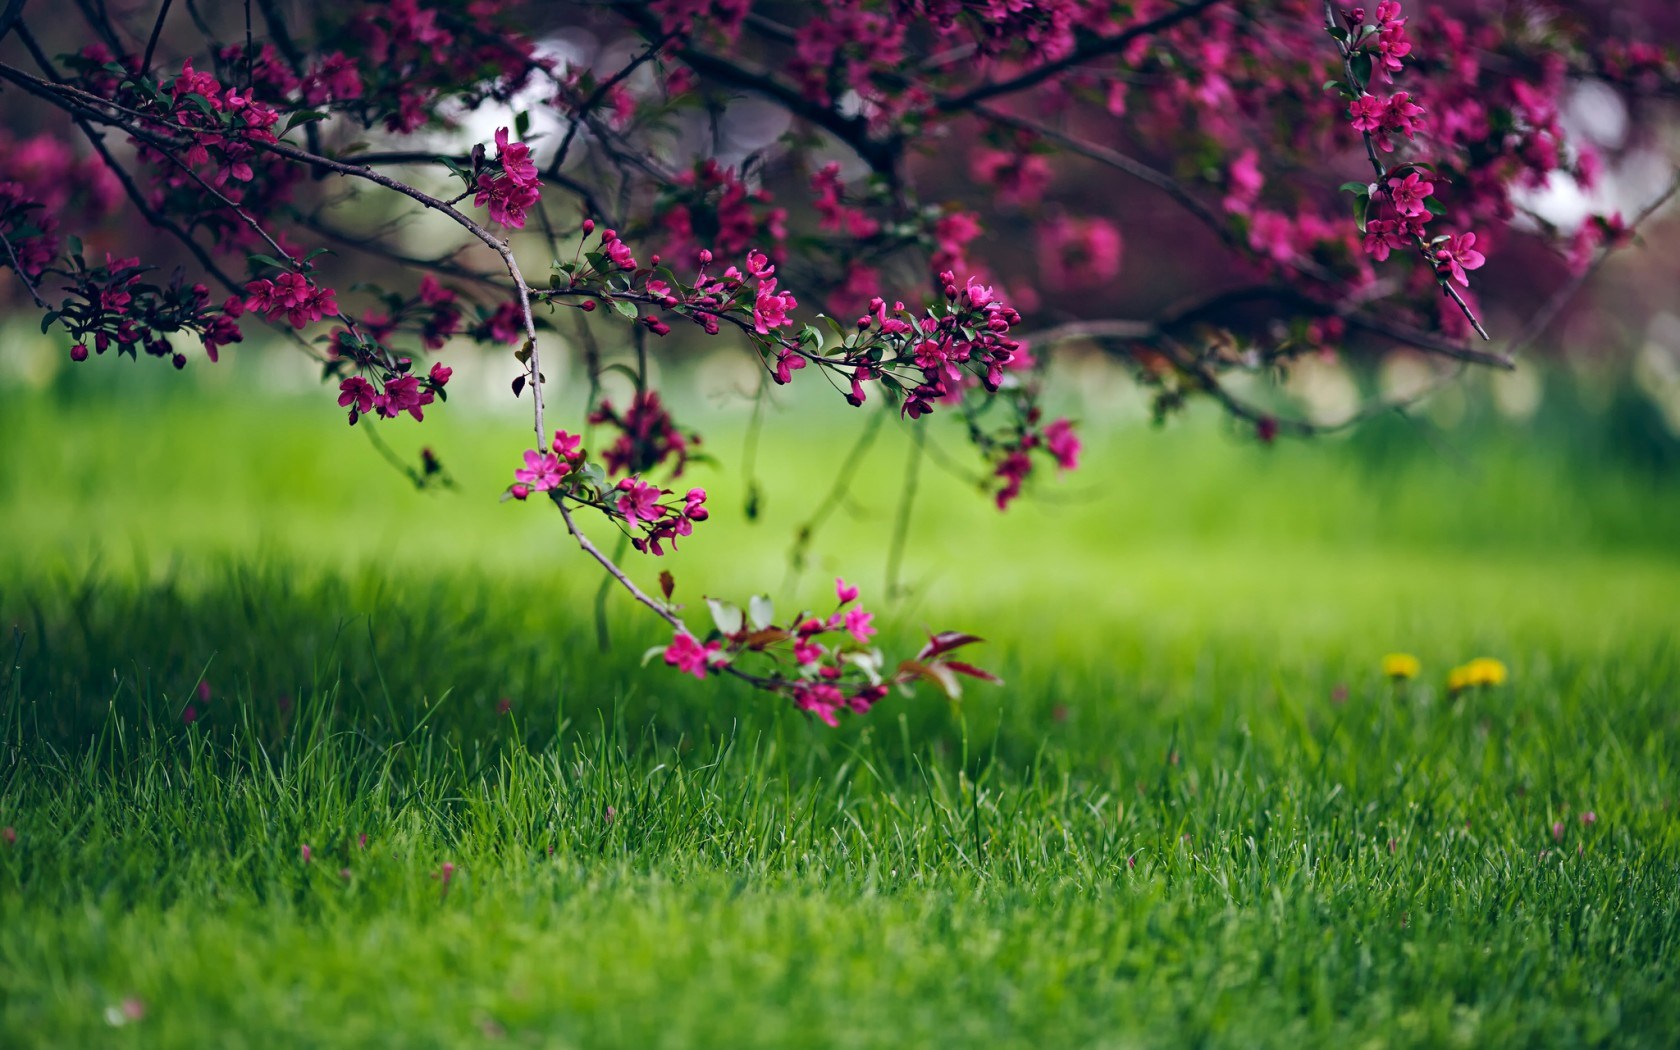 Spring Grass And Flowers Nature Wallpapers - 1680x1050 - 349054